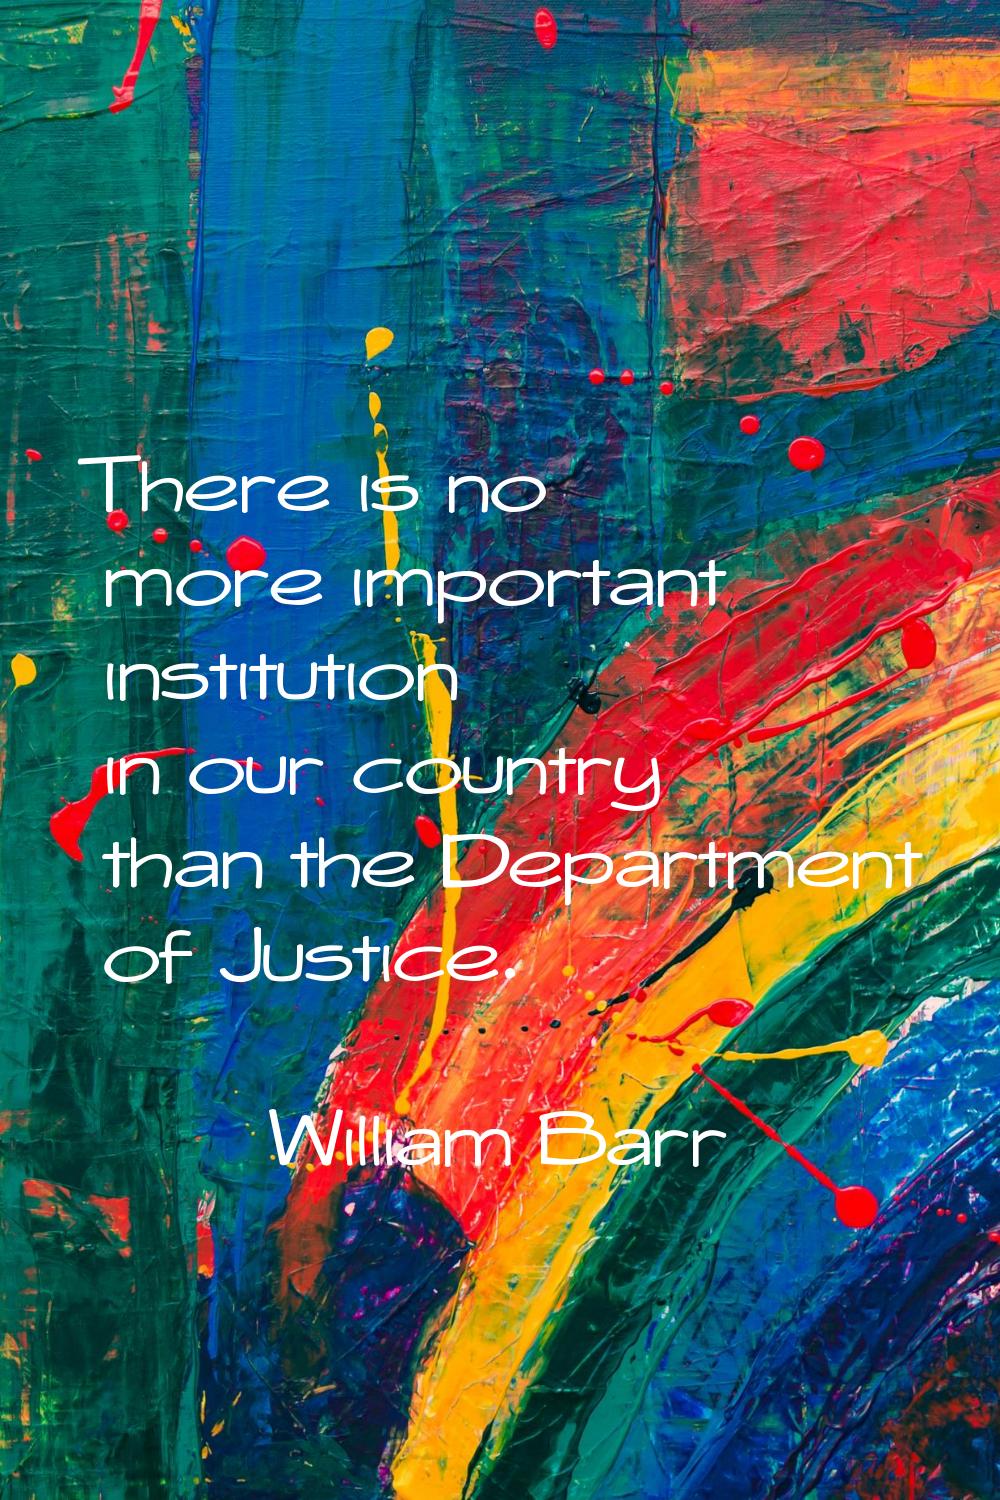 There is no more important institution in our country than the Department of Justice.